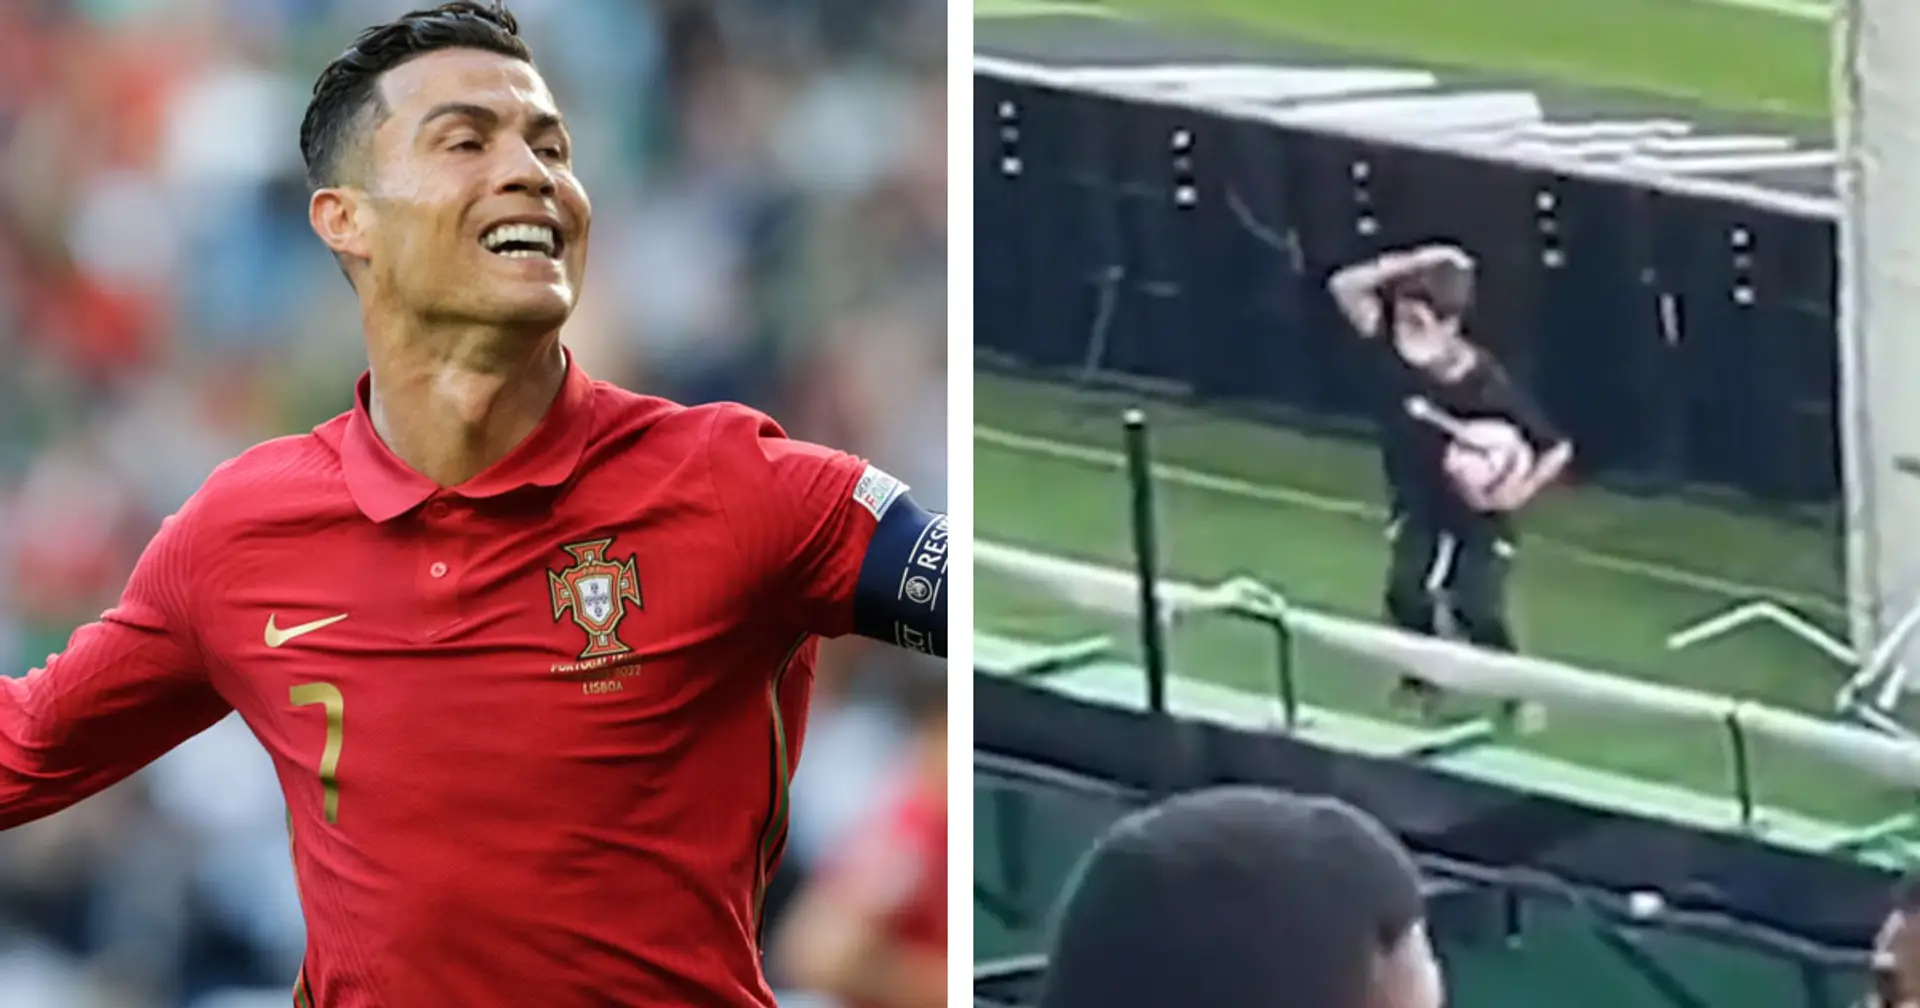 Caught on camera: Ball boy's amazing reaction to high-fiving Ronaldo in Portugal game